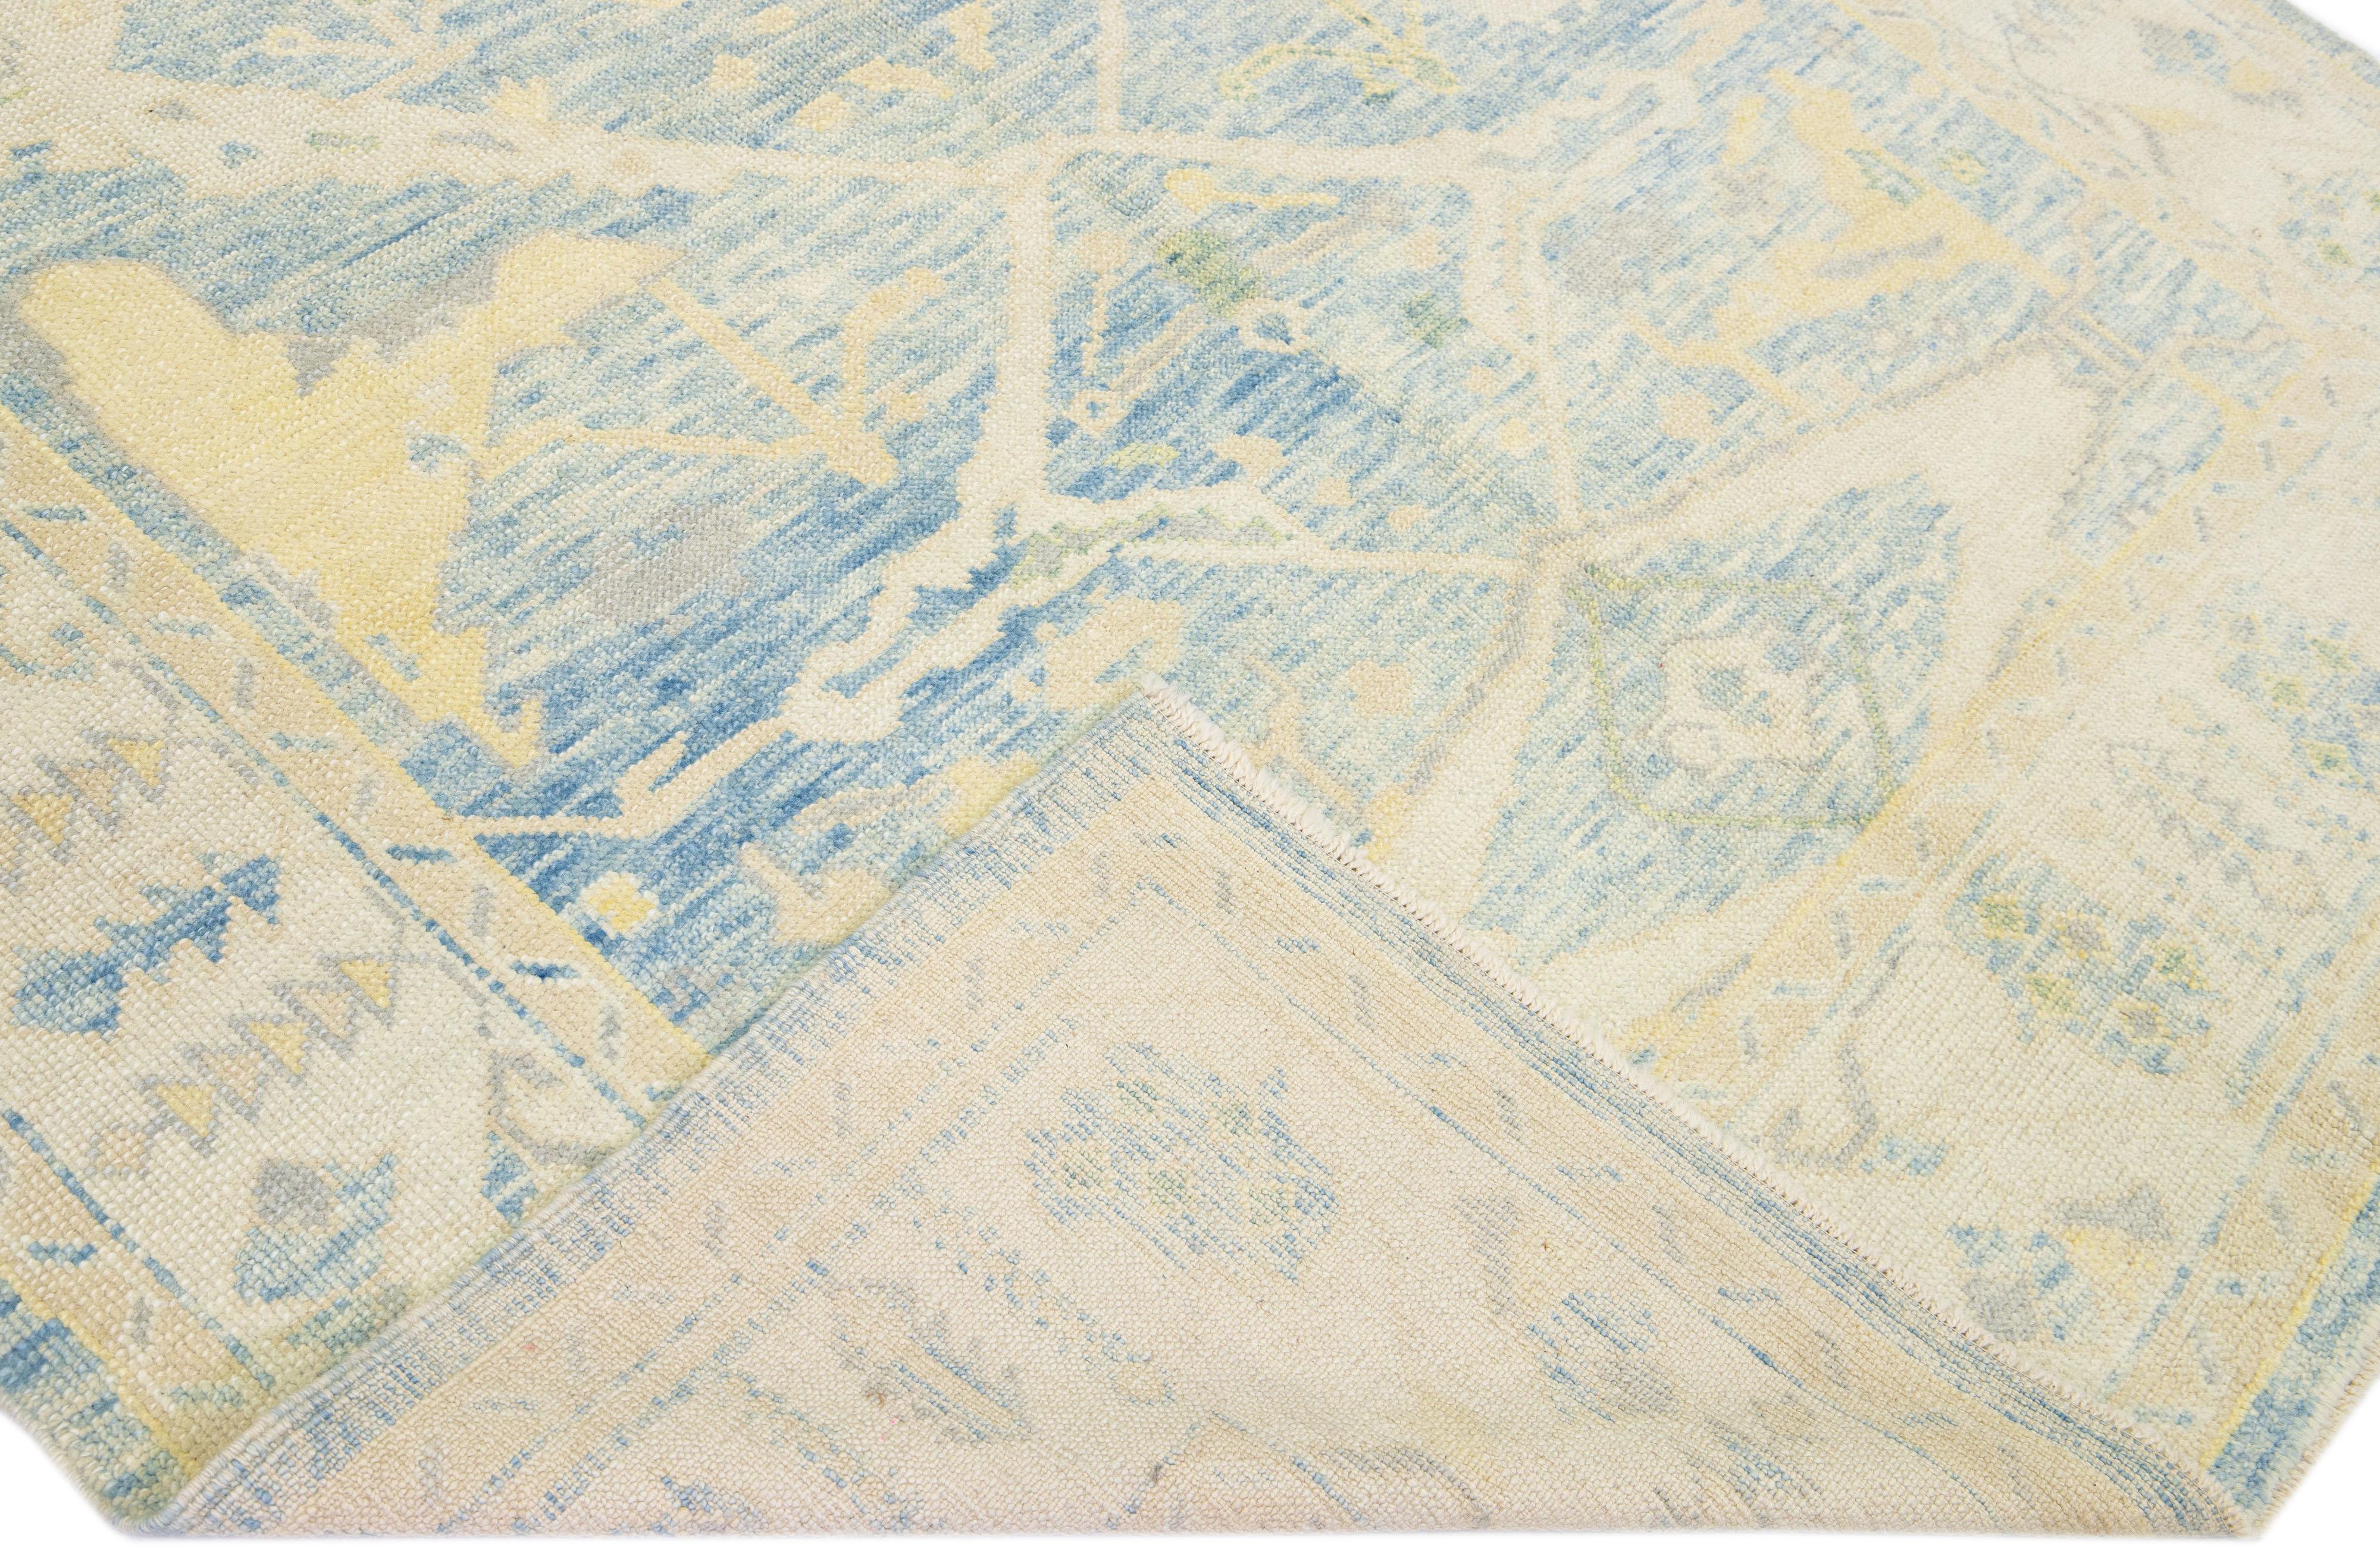 Beautiful modern Oushak hand-knotted wool rug with a blue color field. This Turkish Piece has yellow and beige accent colors in a gorgeous allover pattern.

This rug measures: 6'10